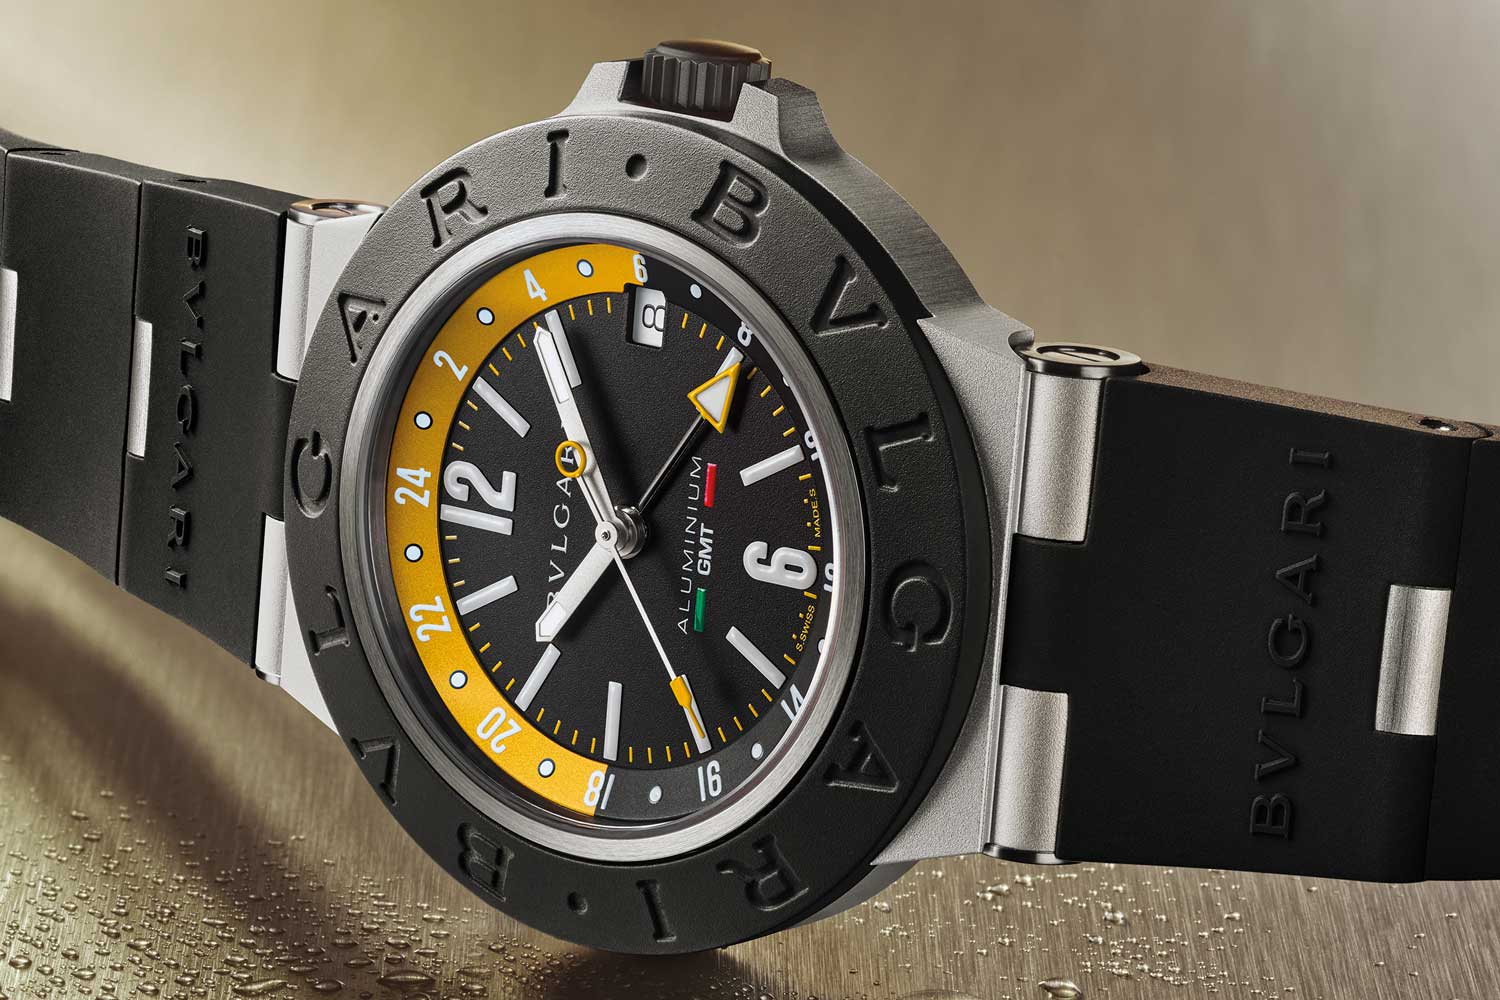 The fixed black rubber bezel featuring the iconic Bvlgari Bvlgari engraving